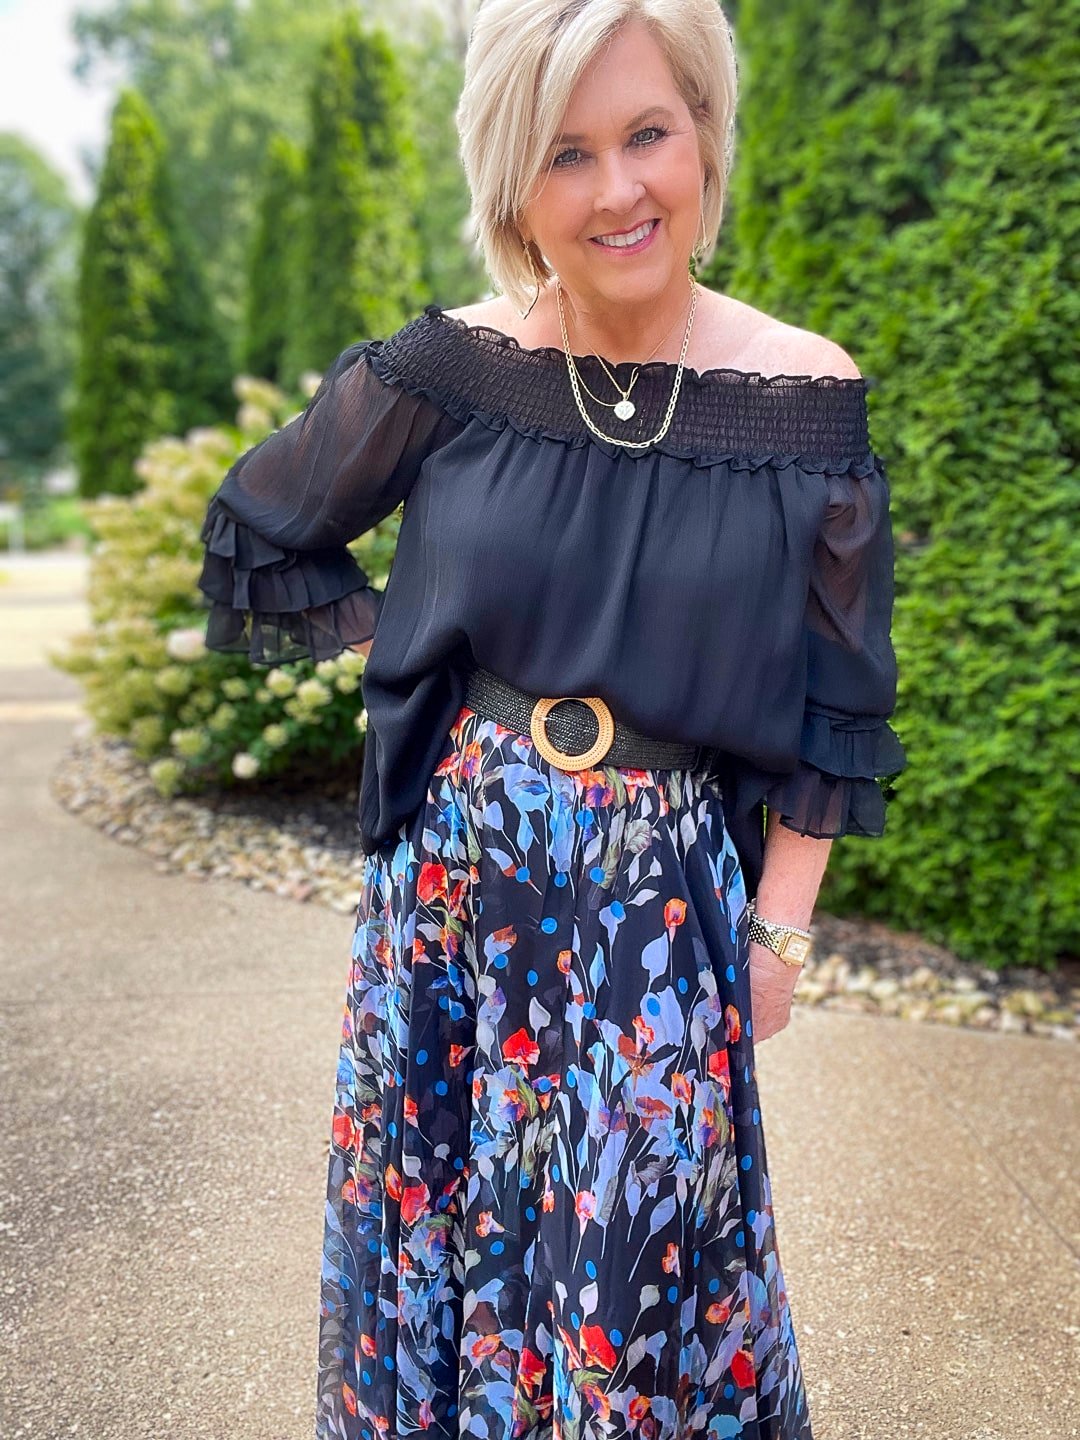 Over 40 Fashion Blogger, Tania Stephens is styling a floral chiffon skirt for a fall wedding20